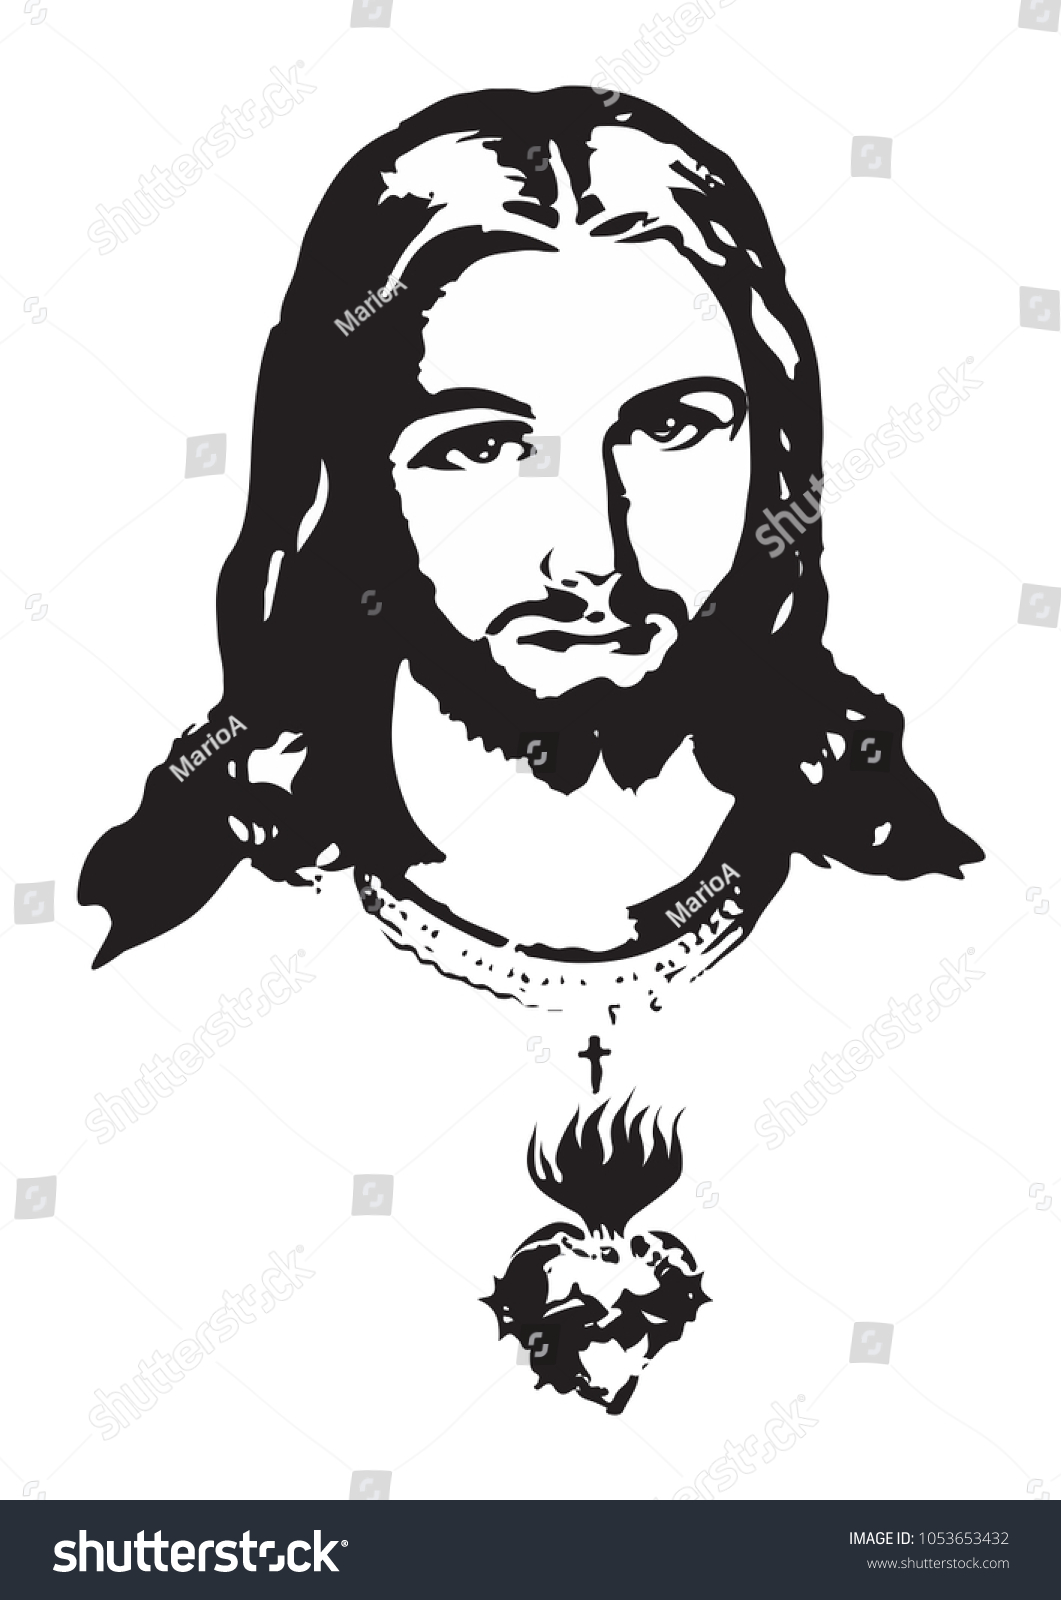 Jesus face black and white Stock Illustrations, Images & Vectors ...